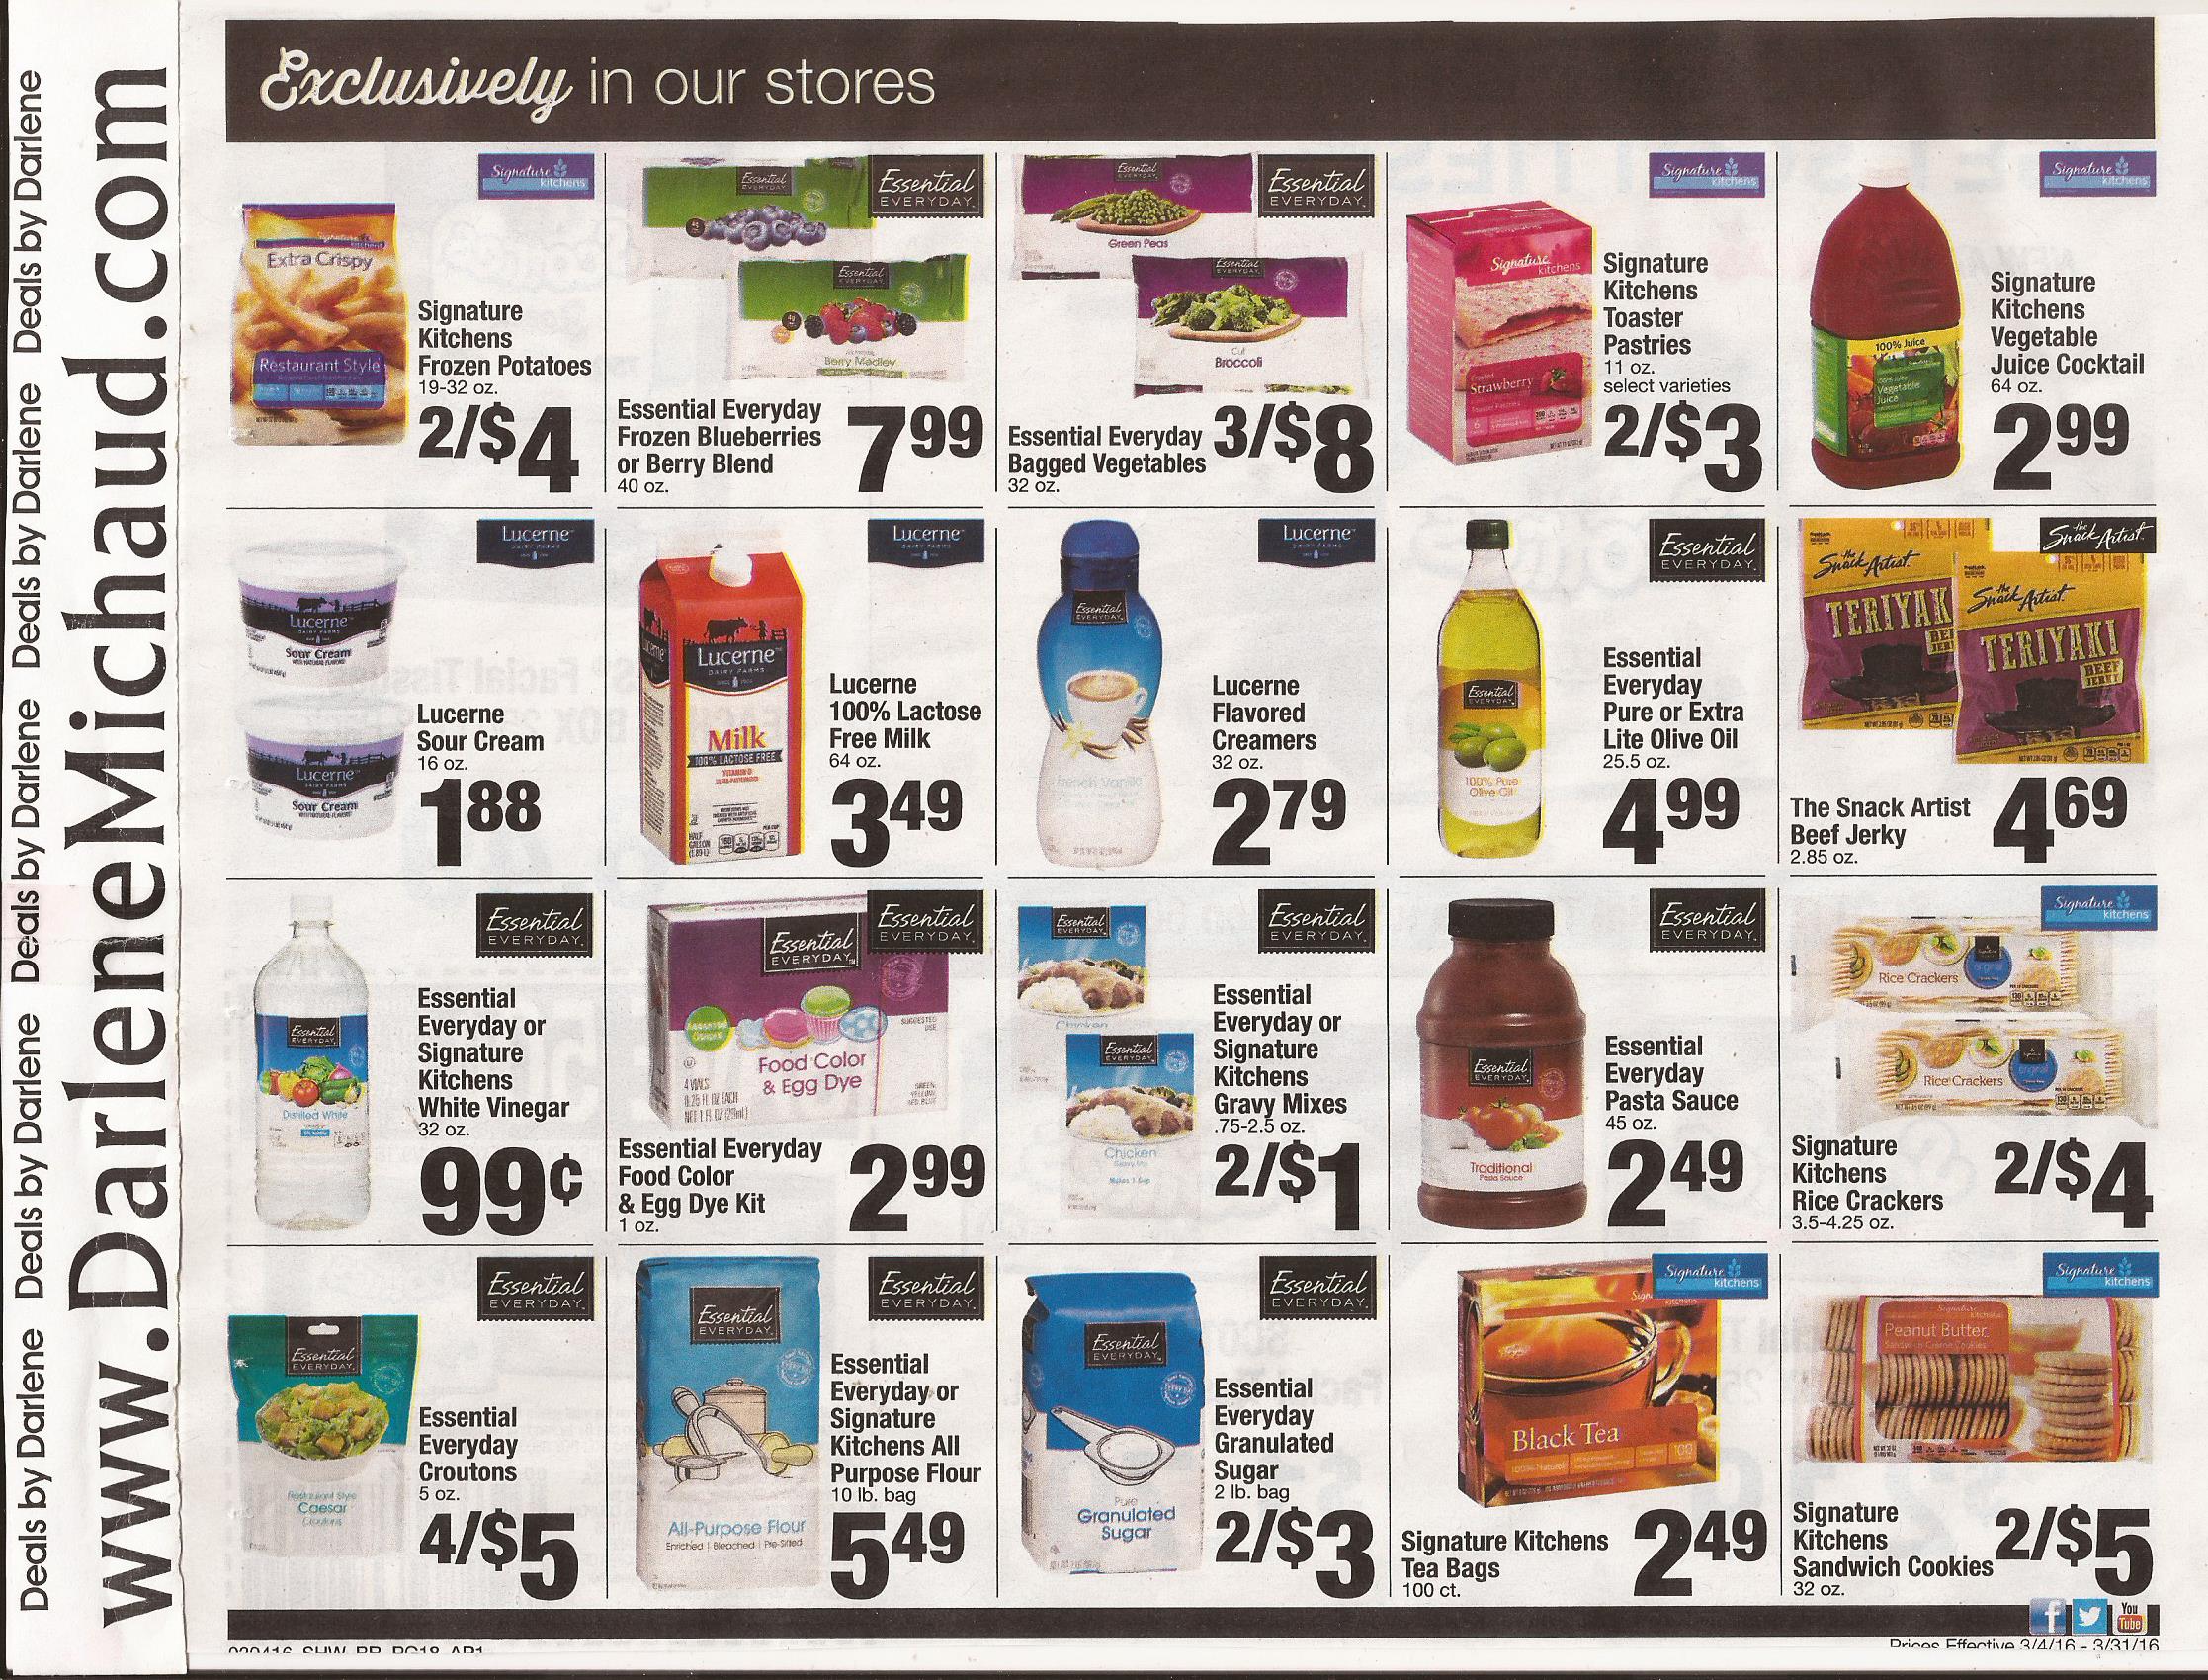 shaws-big-book-savings-march-4-march-31-page-18